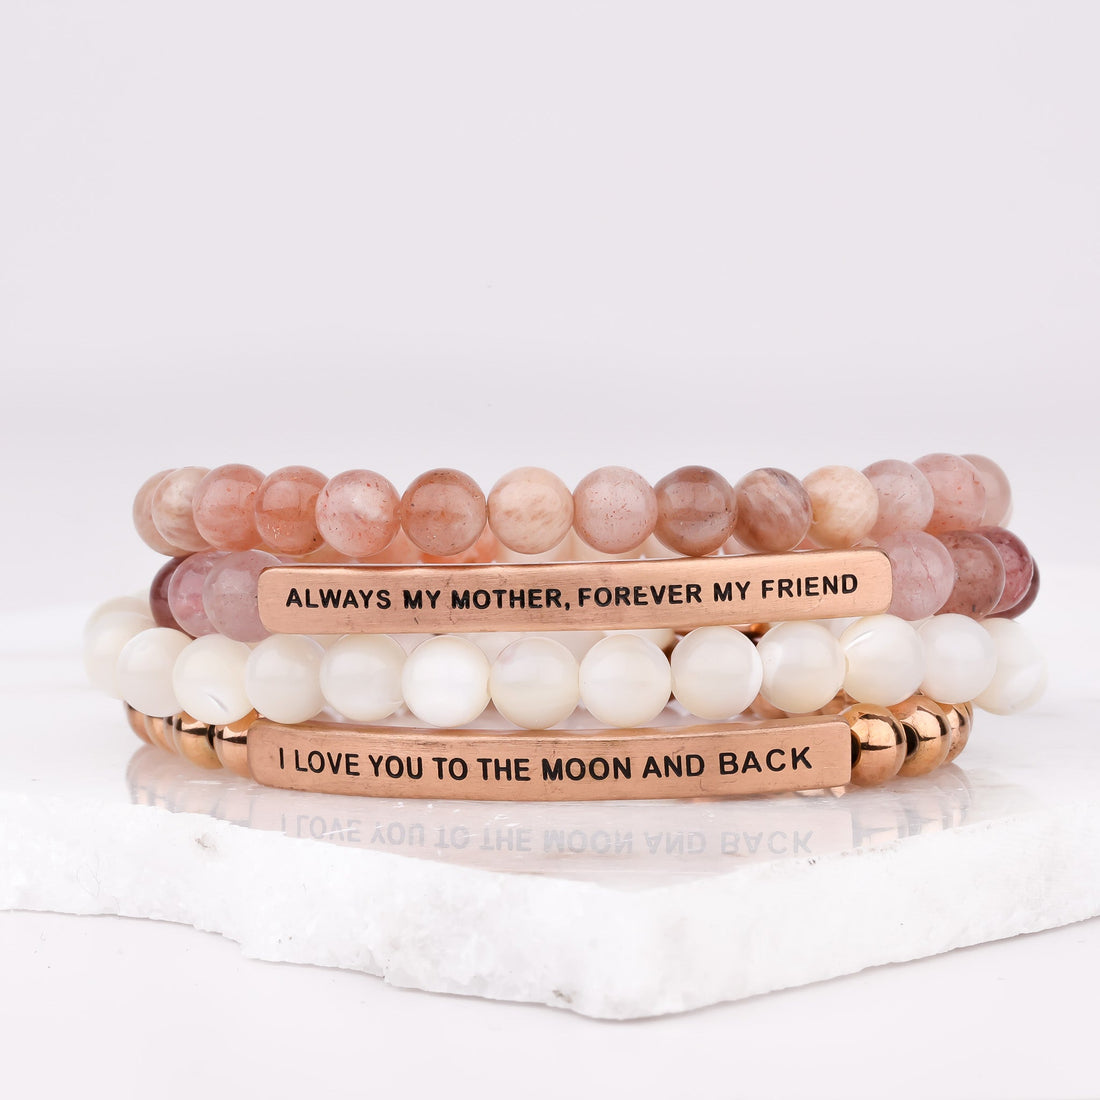 I LOVE YOU TO THE MOON GIFT SET - ROSE GOLD - Inspiration Co.